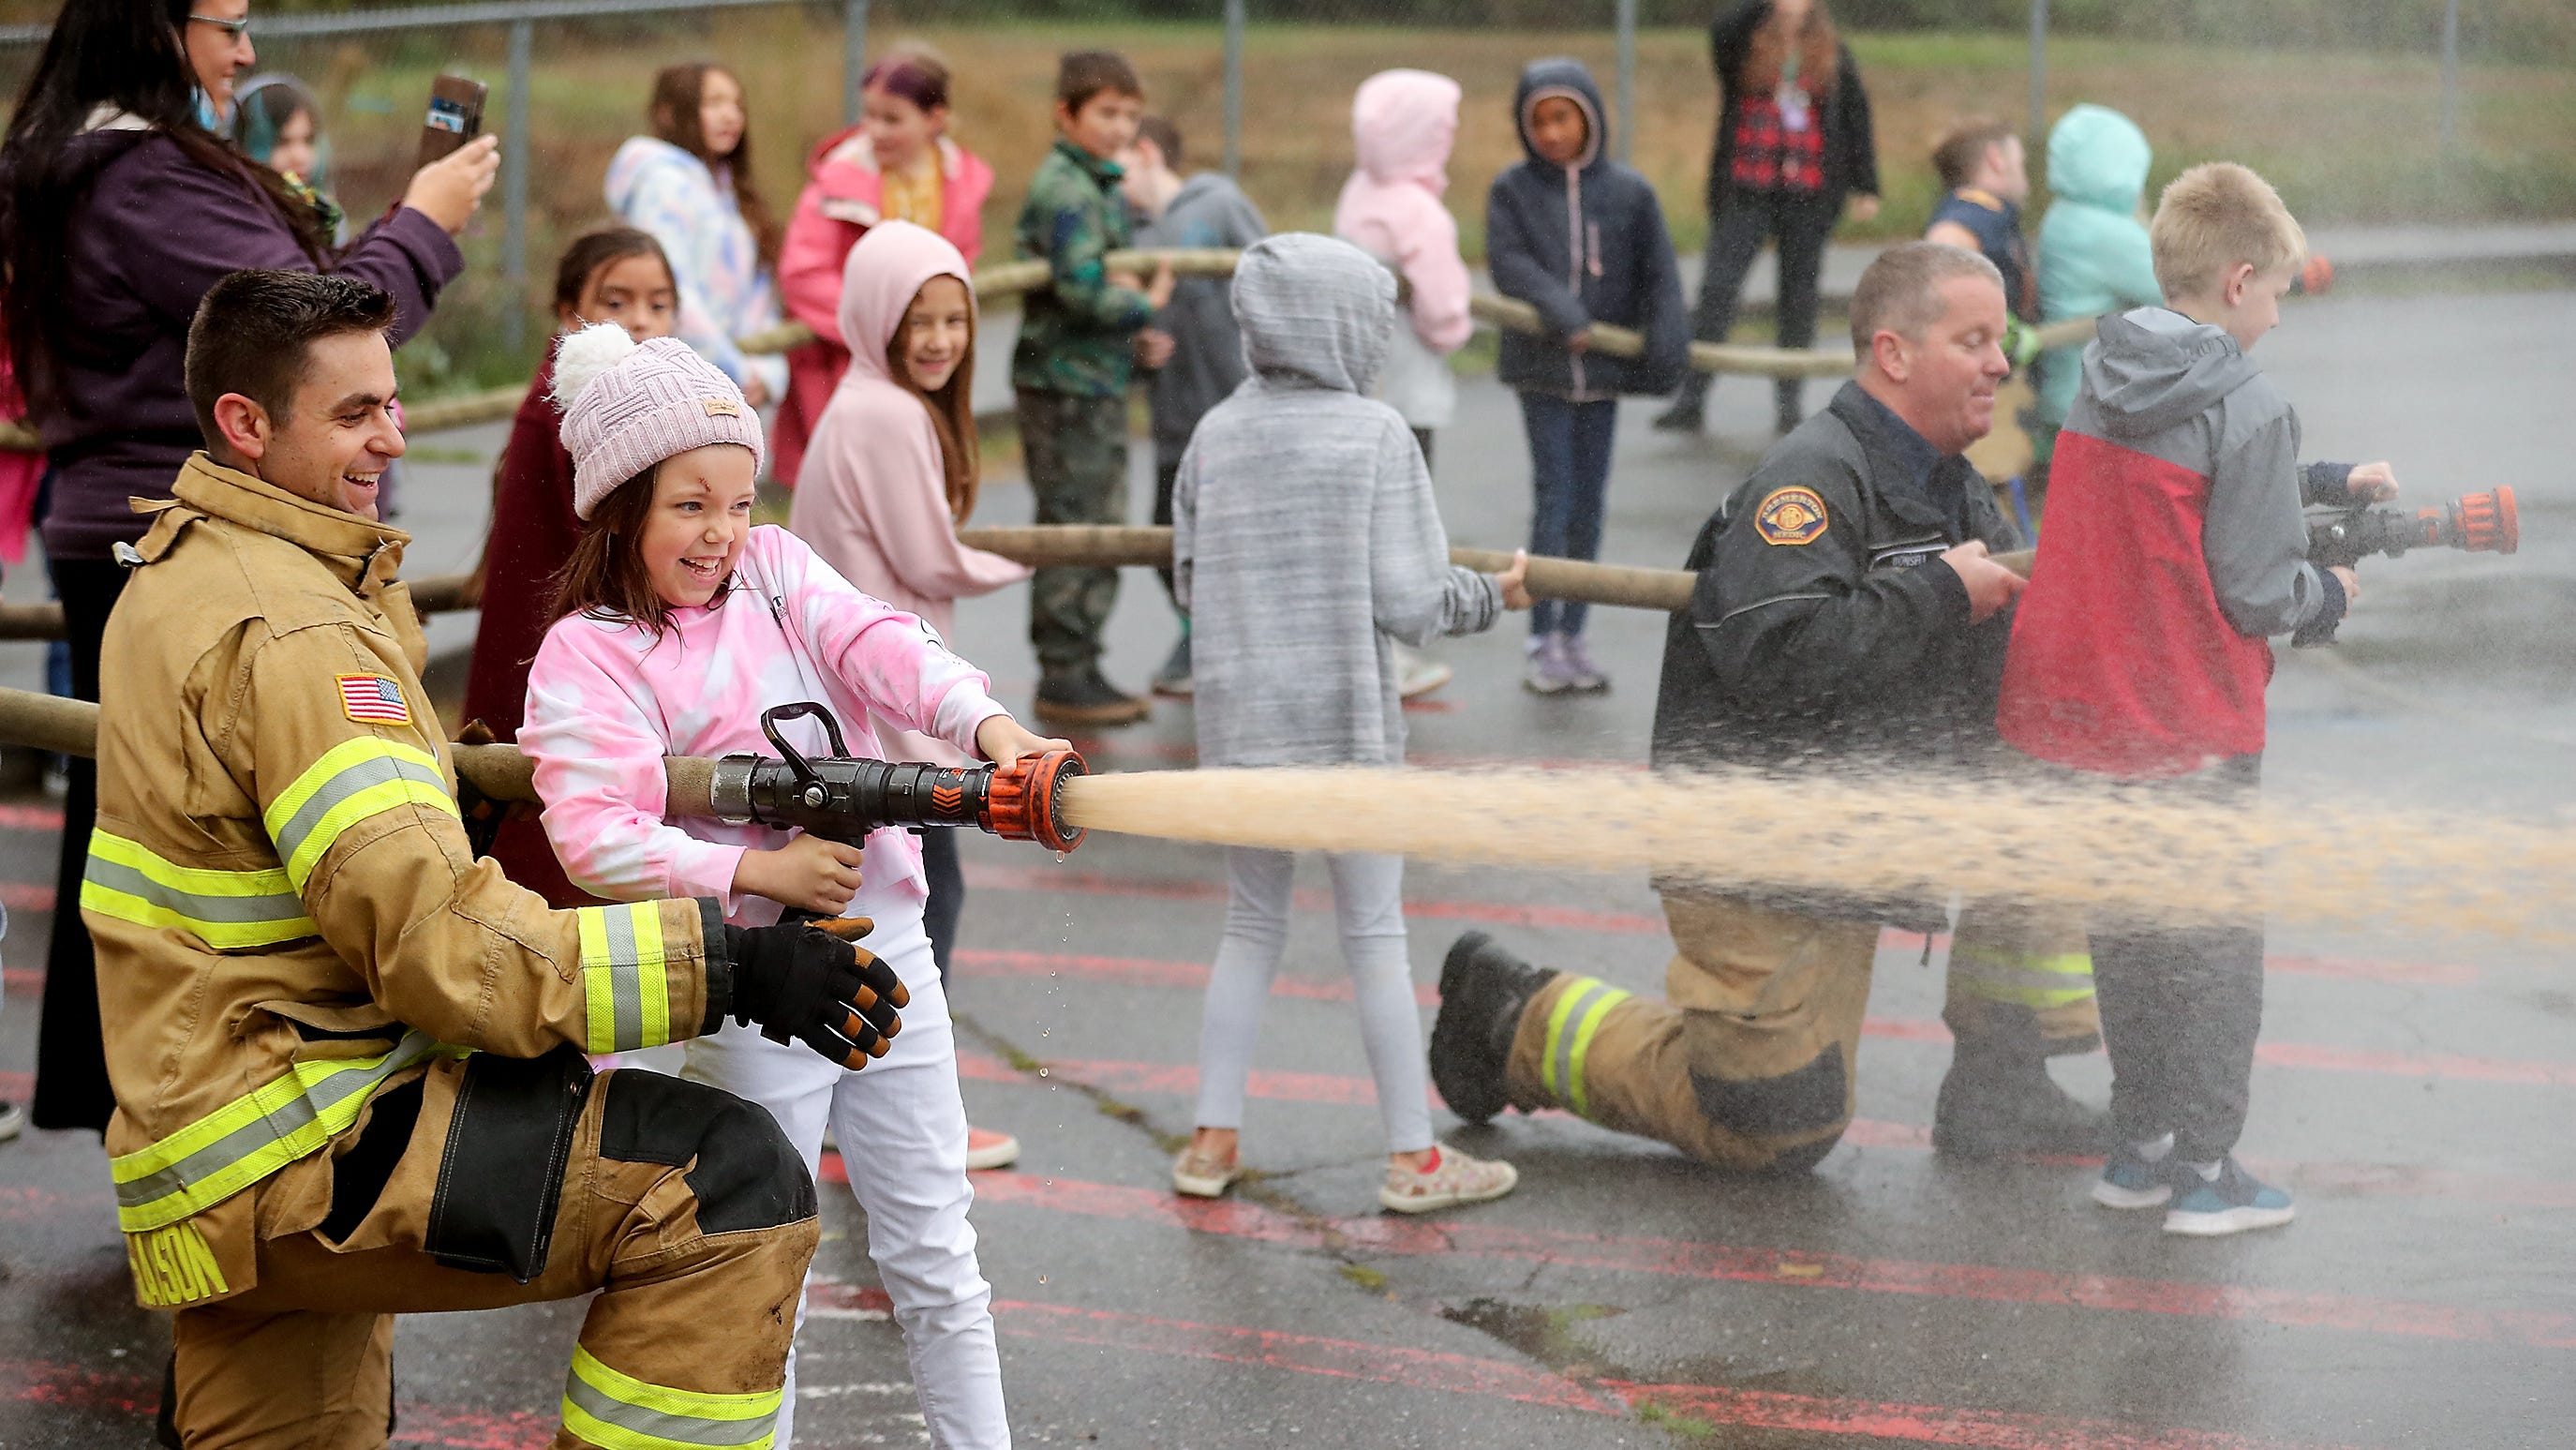 In fire safety lesson, Bremerton students get a chance to go with the flow